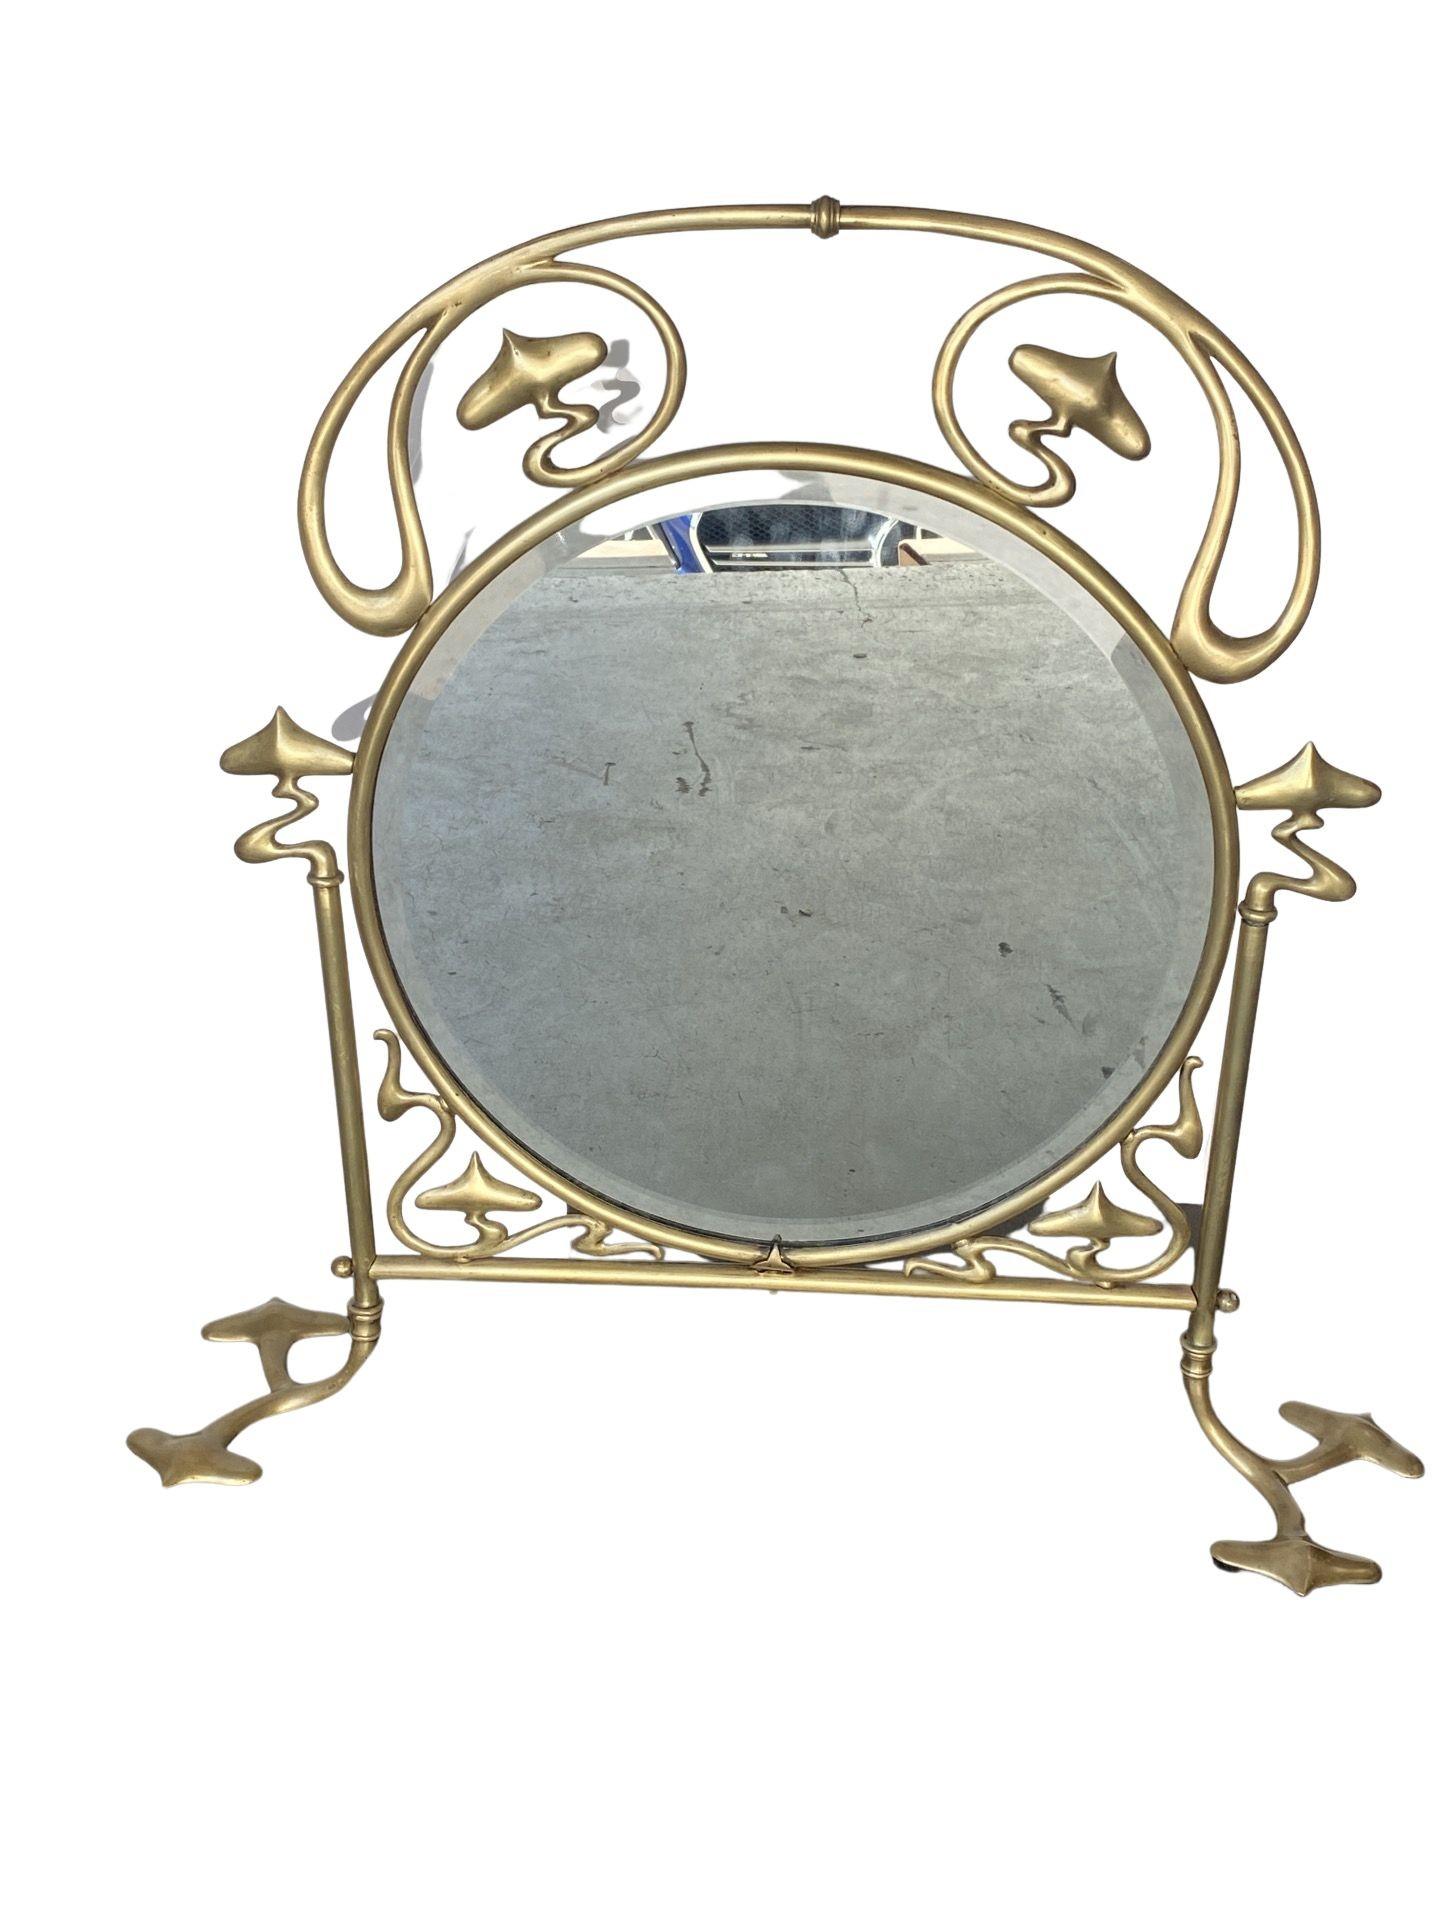 French Art Nouveau solid cast brass fire screen with a beveled mirror glass along. The frame is very decorative ormolu with a carrying handle to the top.

Measurements: 29